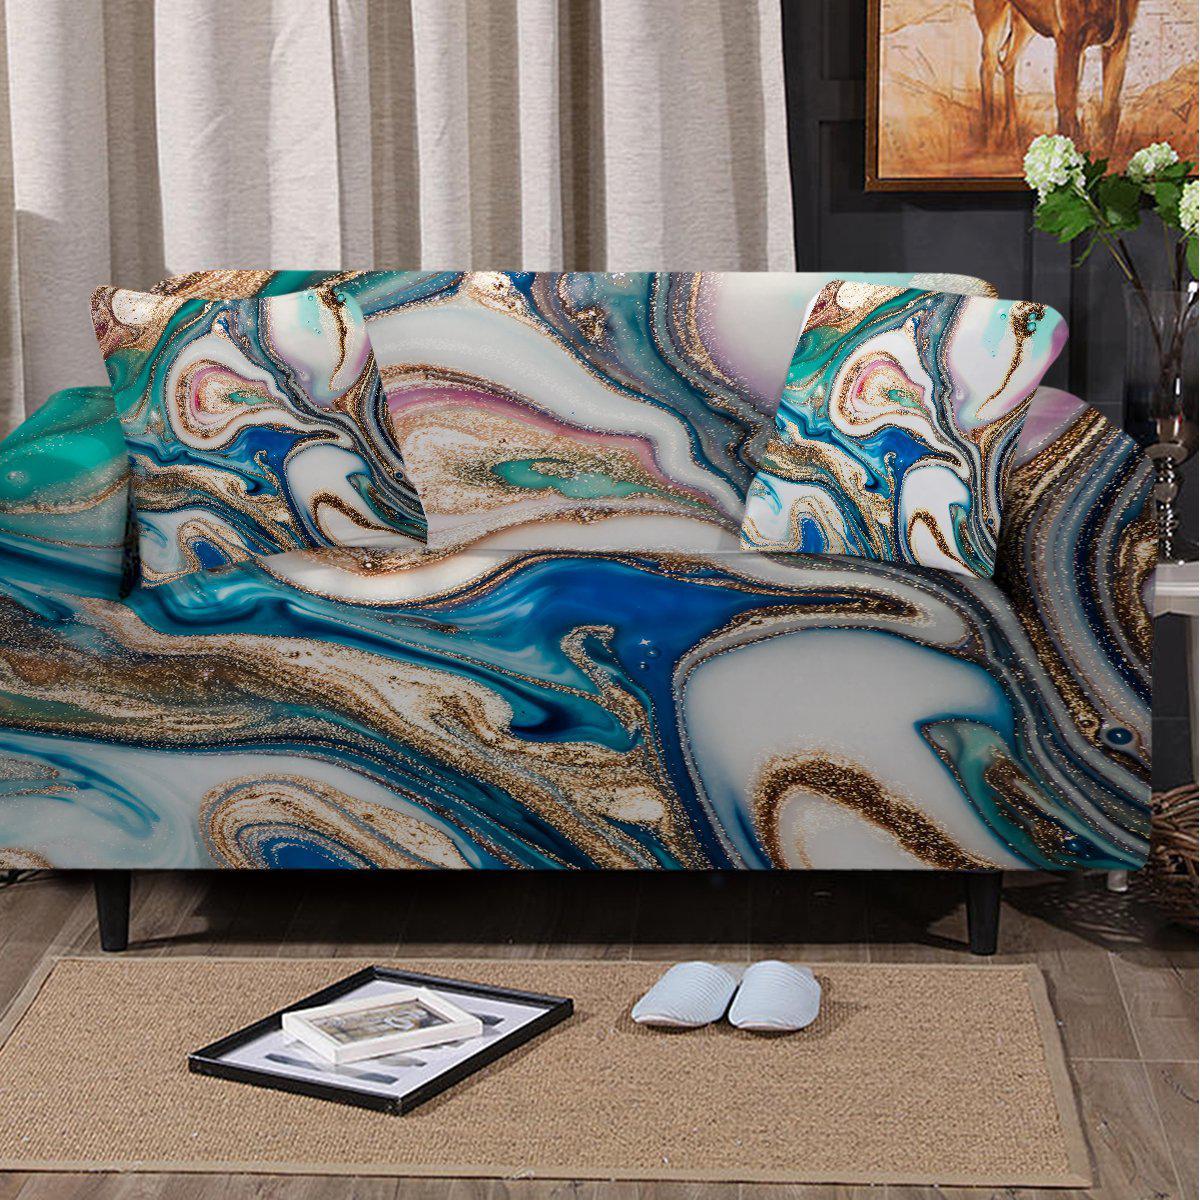 Tropical Sofa Cover - Hibiscus & Butterfly by Coastal Passion